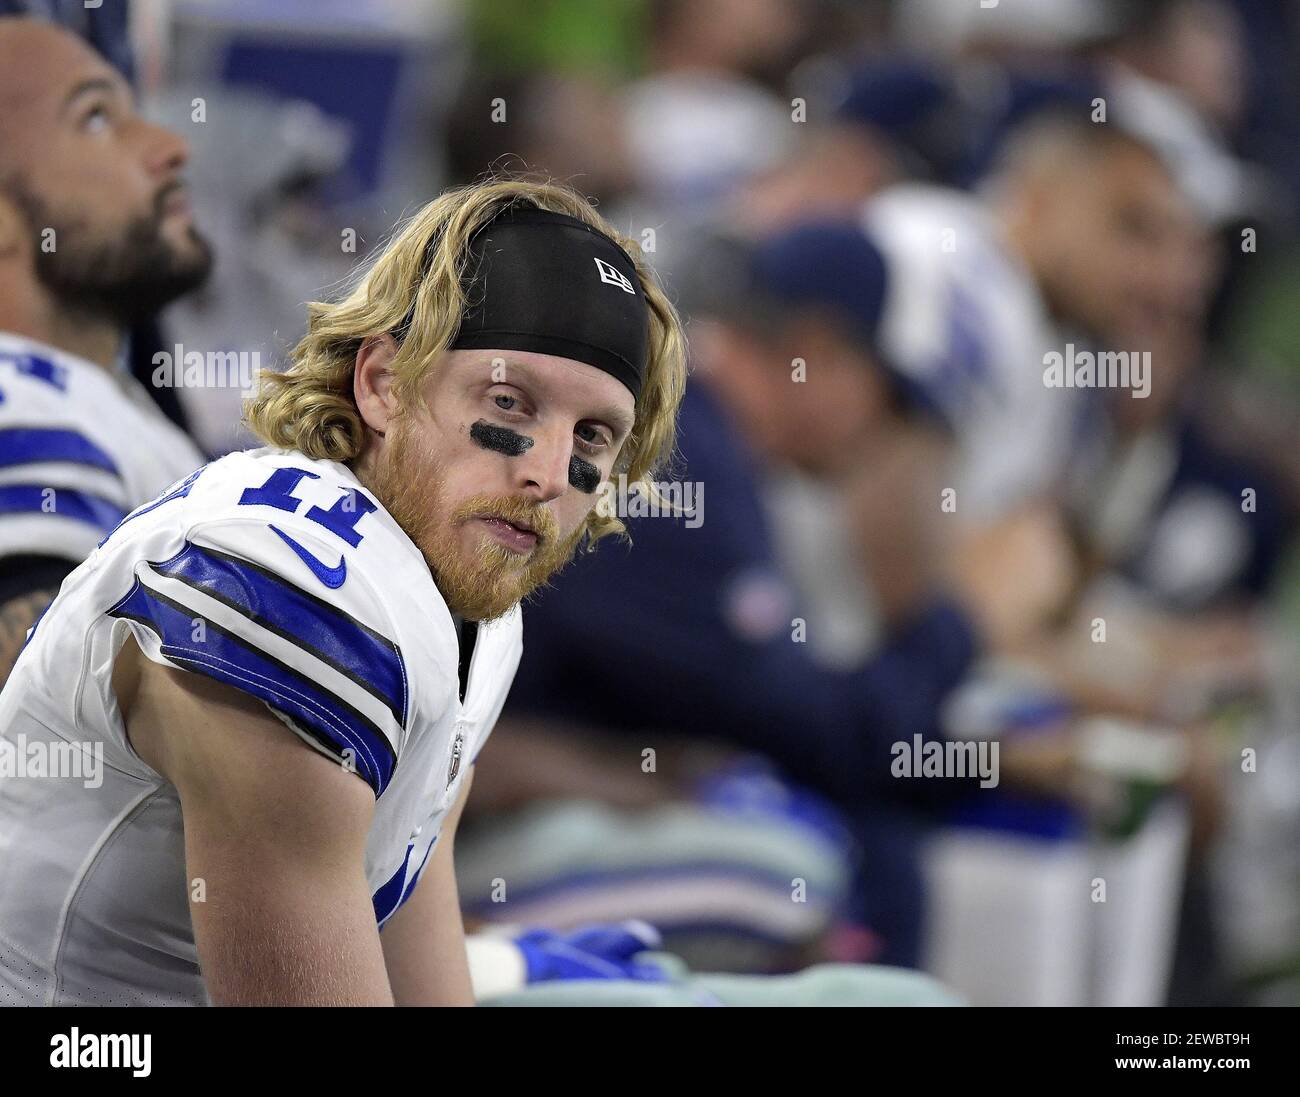 Dallas Cowboys wide receiver Cole Beasley (11) during during a game against  the Philadelphia Eagles on November 19, 2017, at AT&T Stadium in Arlington,  Texas. (Photo by Max Faulkner/Fort Worth Star-Telegram/TNS/Sipa USA